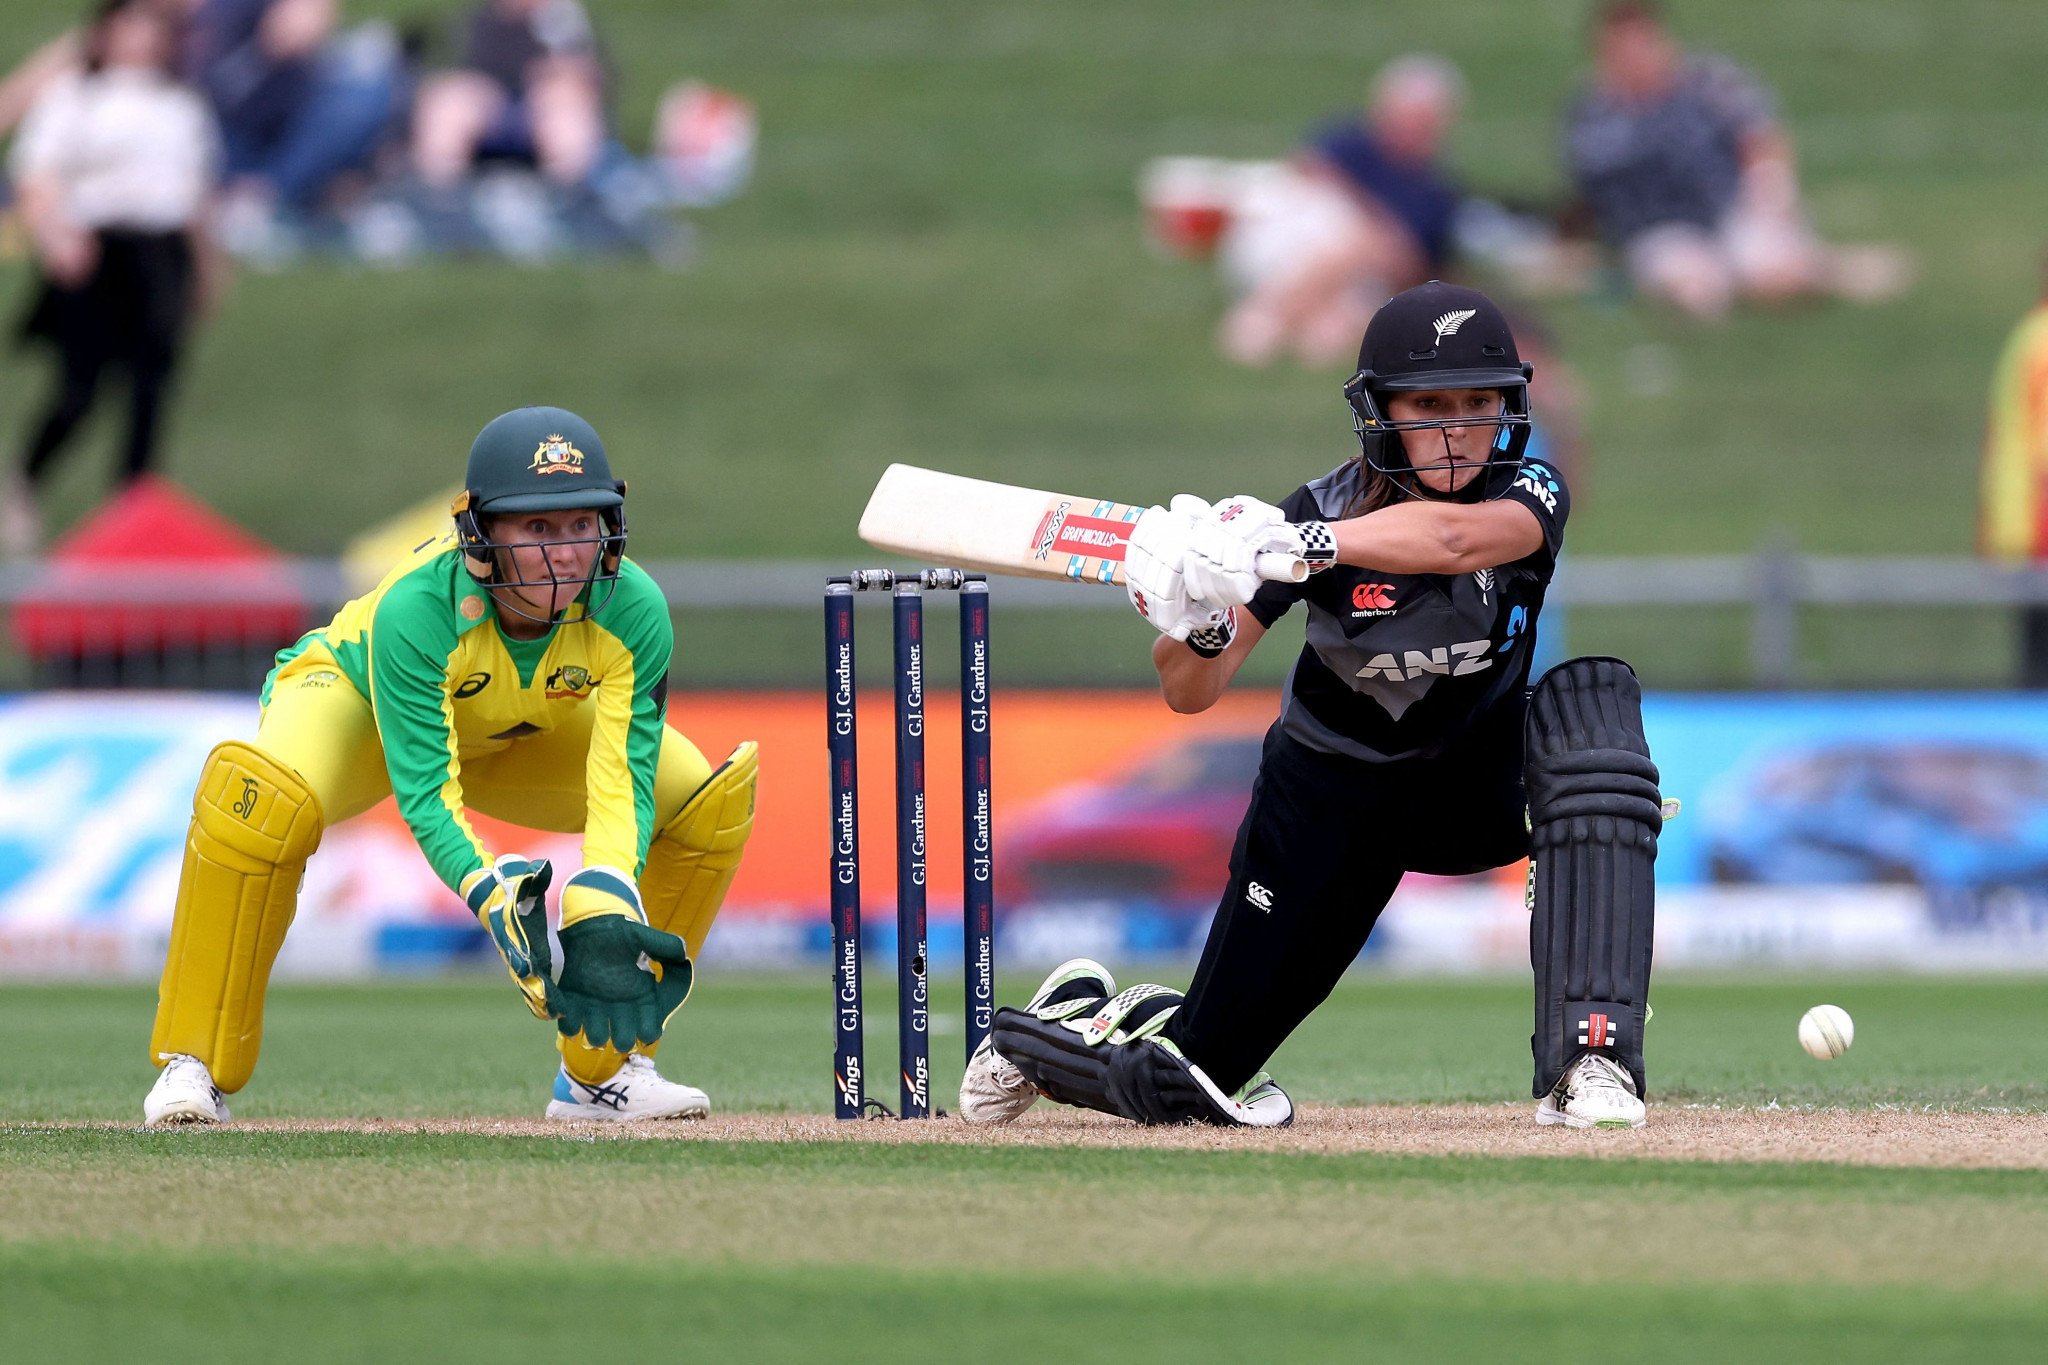 Five qualified teams for women's cricket tournament at Commonwealth Games confirmed